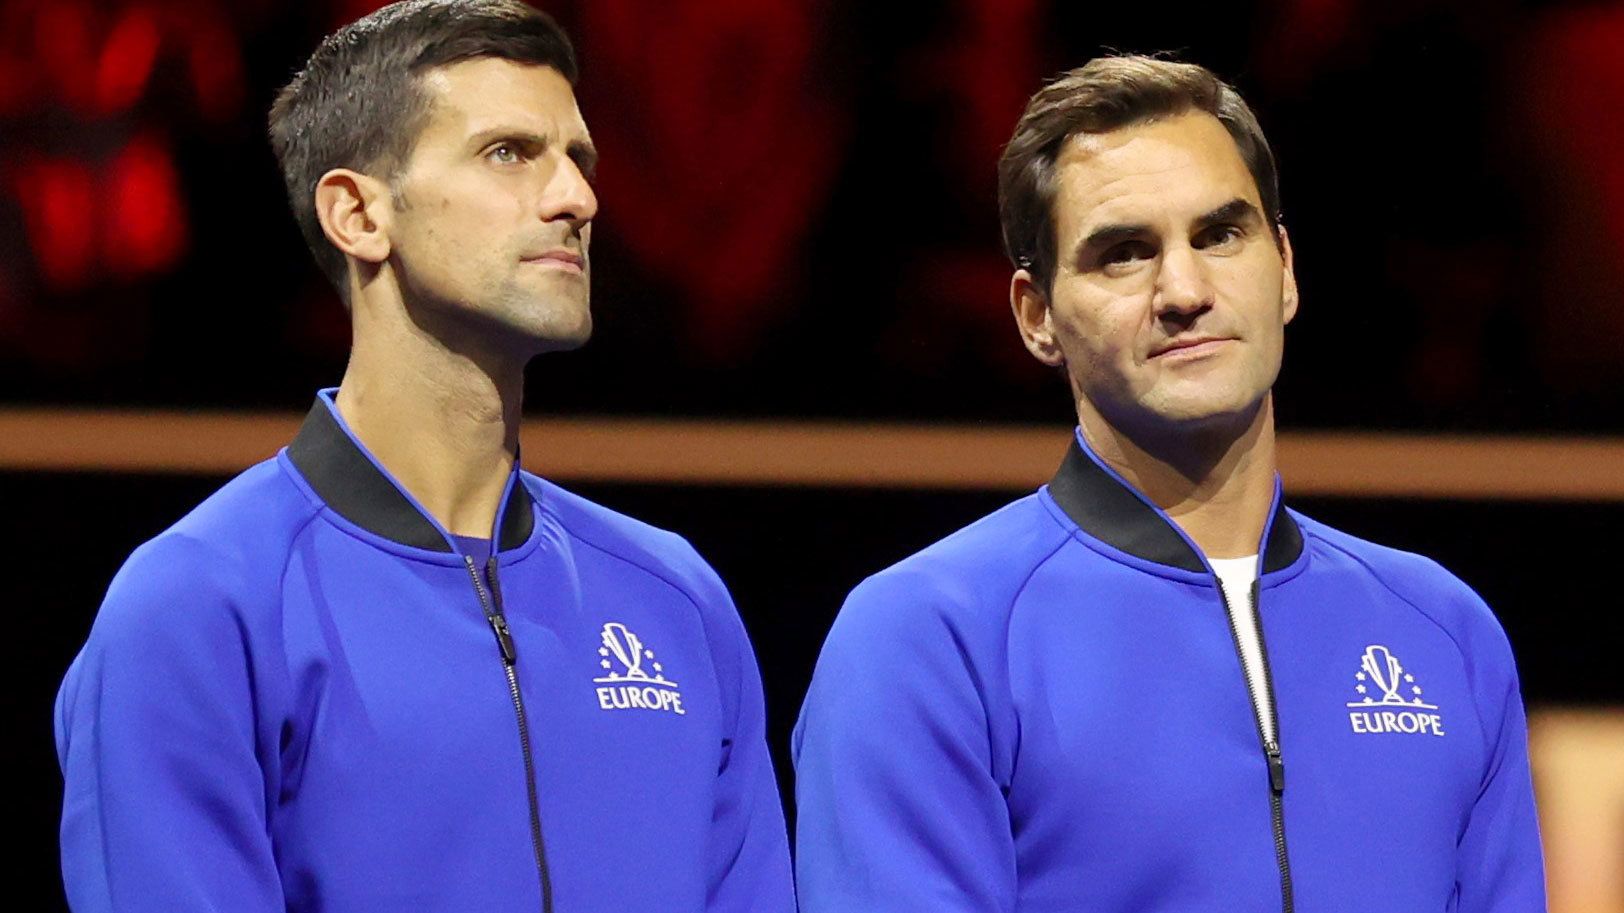 Novak Djokovic and Roger Federer attend the trophy ceremony after the Laver Cup tennis tournament between Team World and Team Europe in London, Britain, on Sept. 26, 2022. 